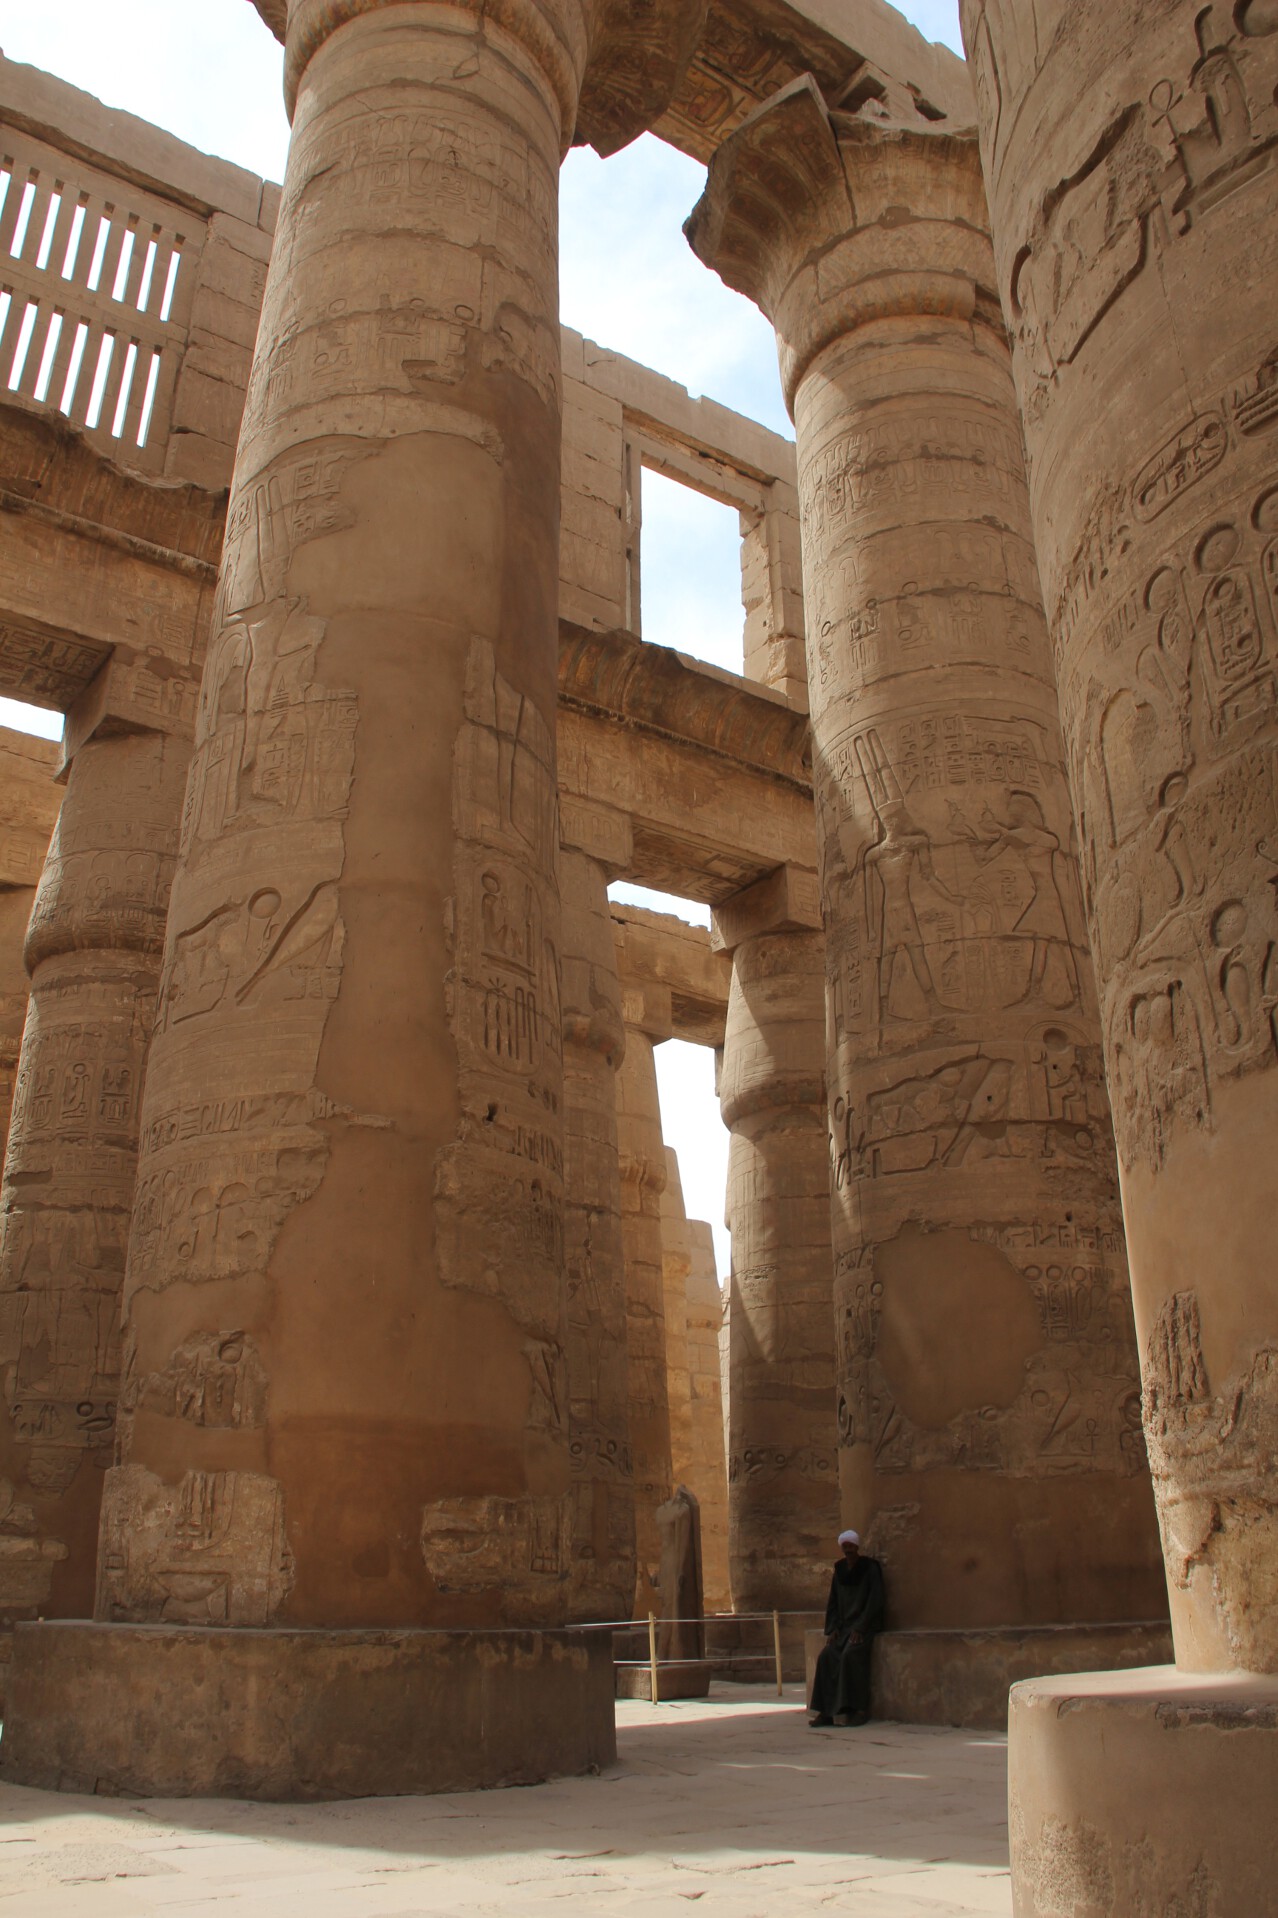 A guard keeps watch in the Temple of Amun's Great Hypostyle Hall in Karnak.